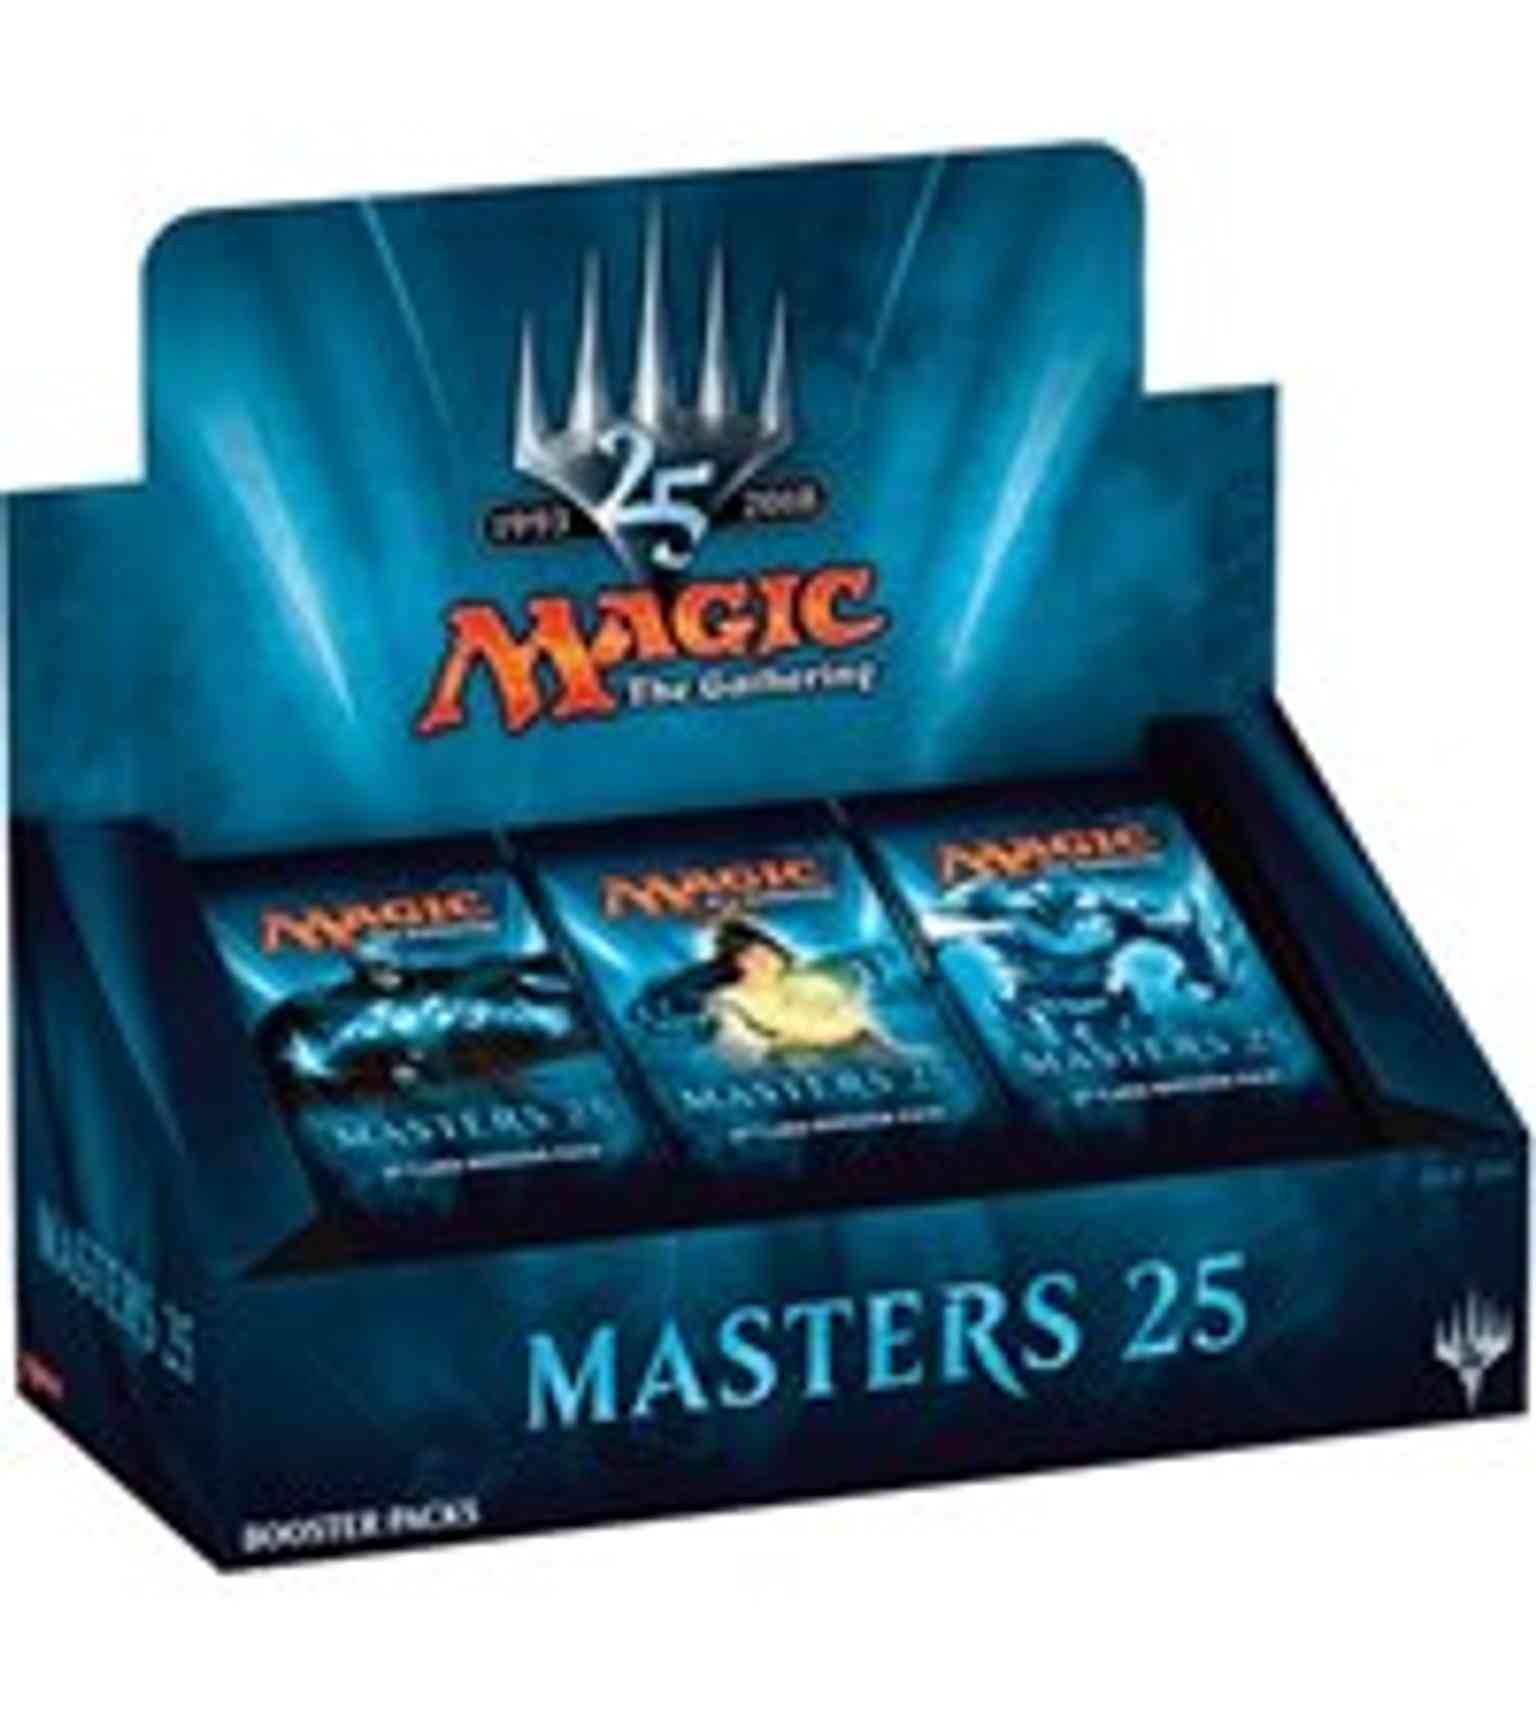 Masters 25 - Booster Box magic card front